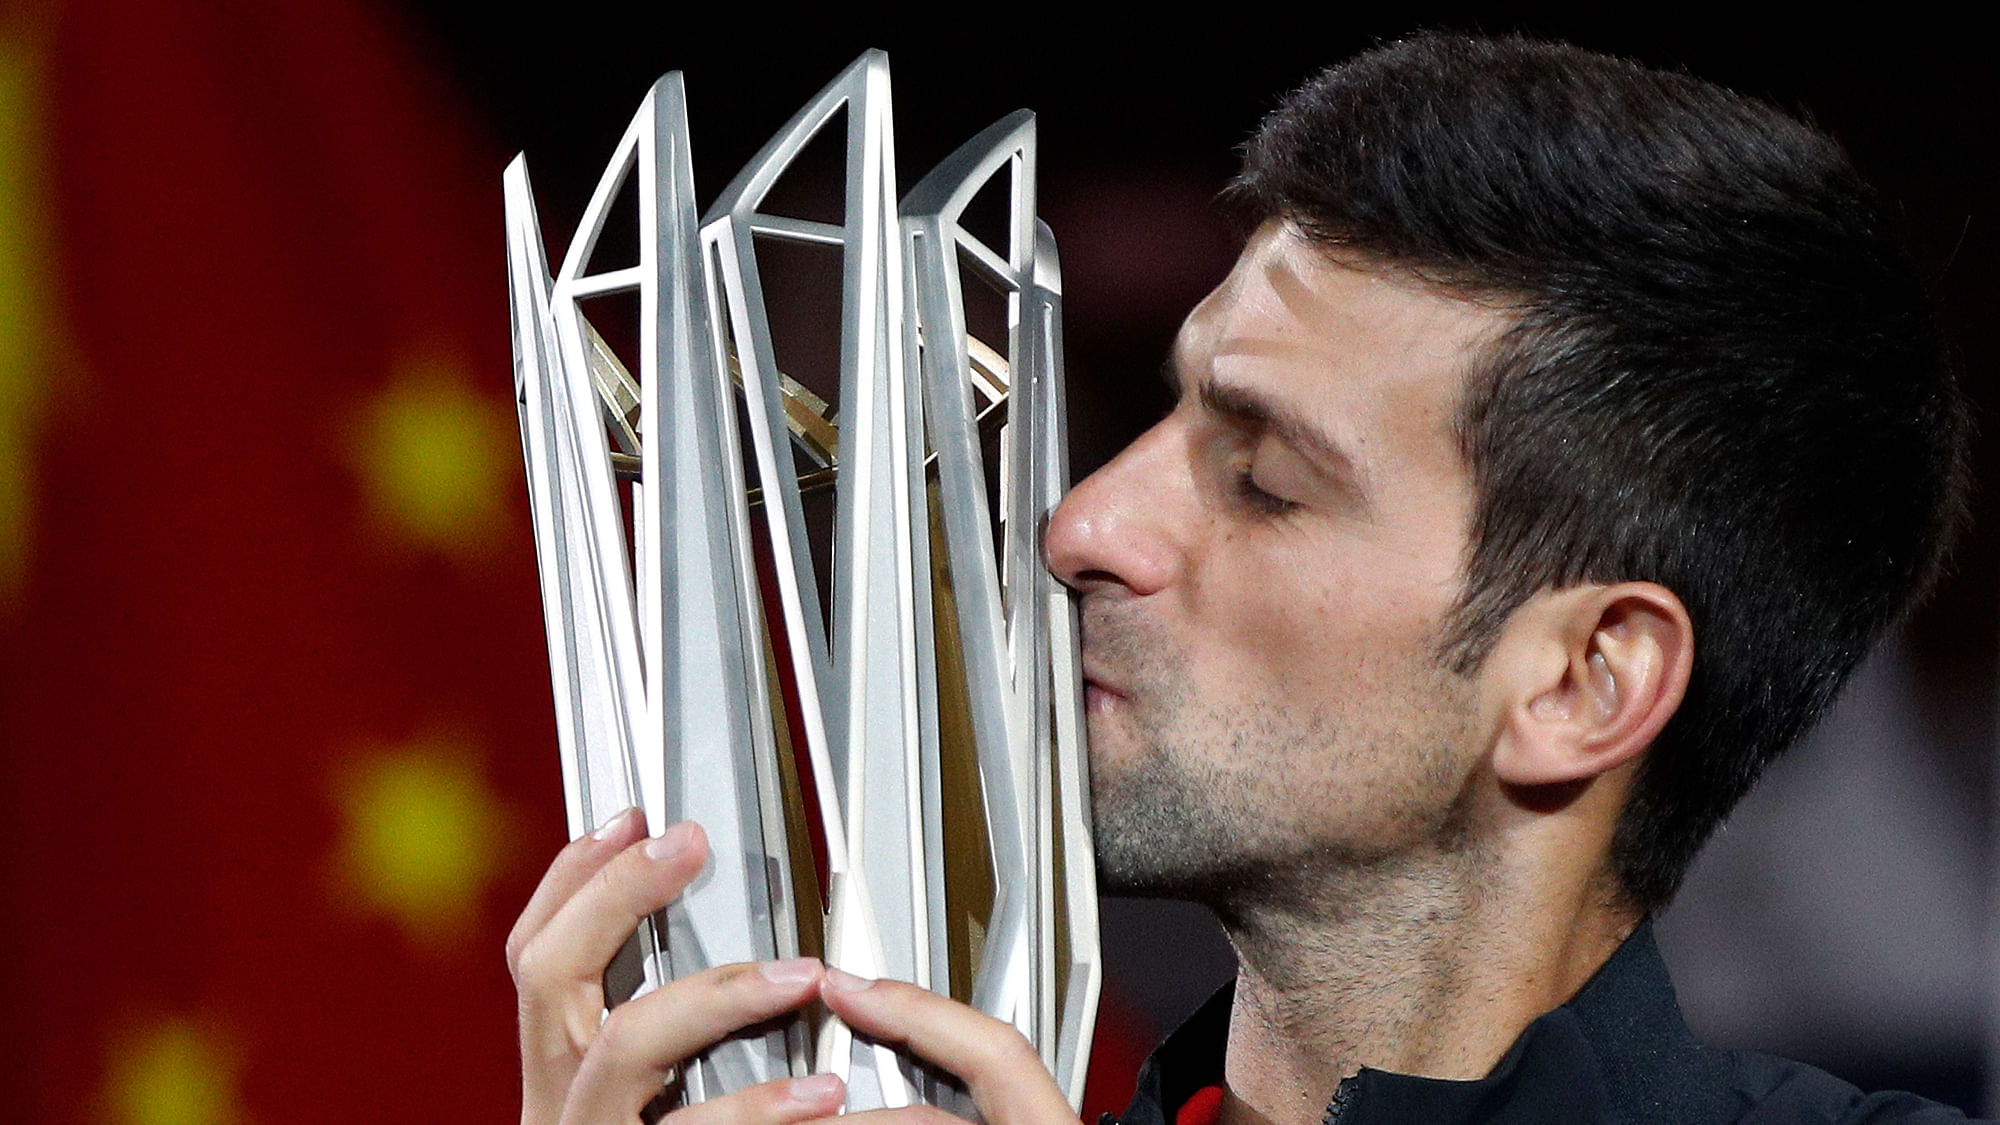 Novak Djokovic of Serbia kisses his trophy after defeating Borna Coric of Croatia in their men’s singles final match to win the Shanghai Masters tennis tournament.